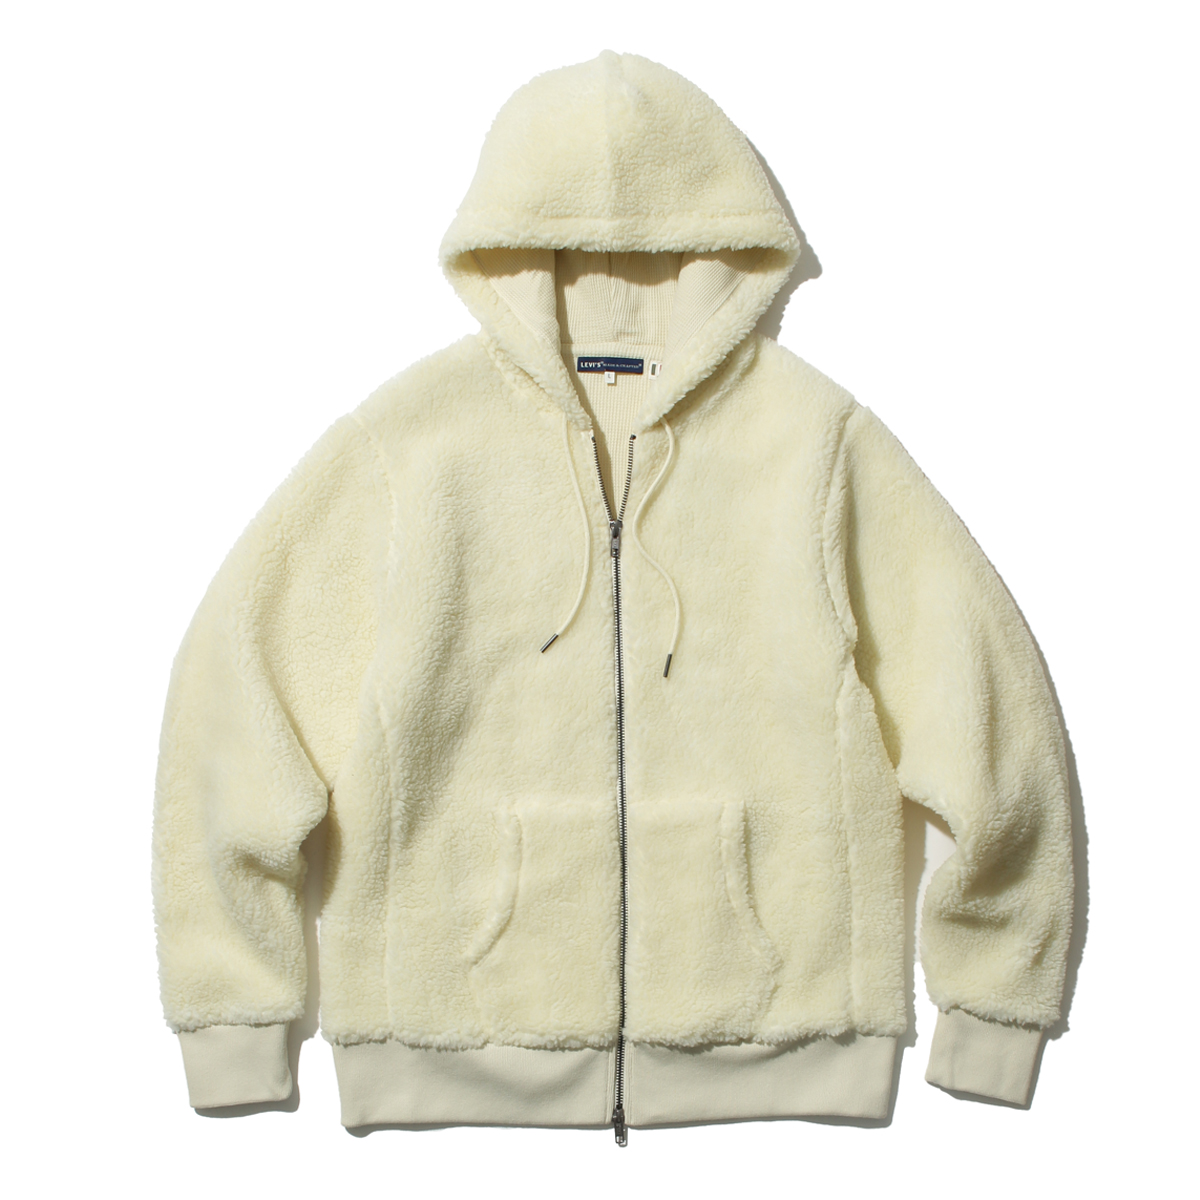 LEVI’S(R) MADE&CRAFTED(R) ZIP HOODIE